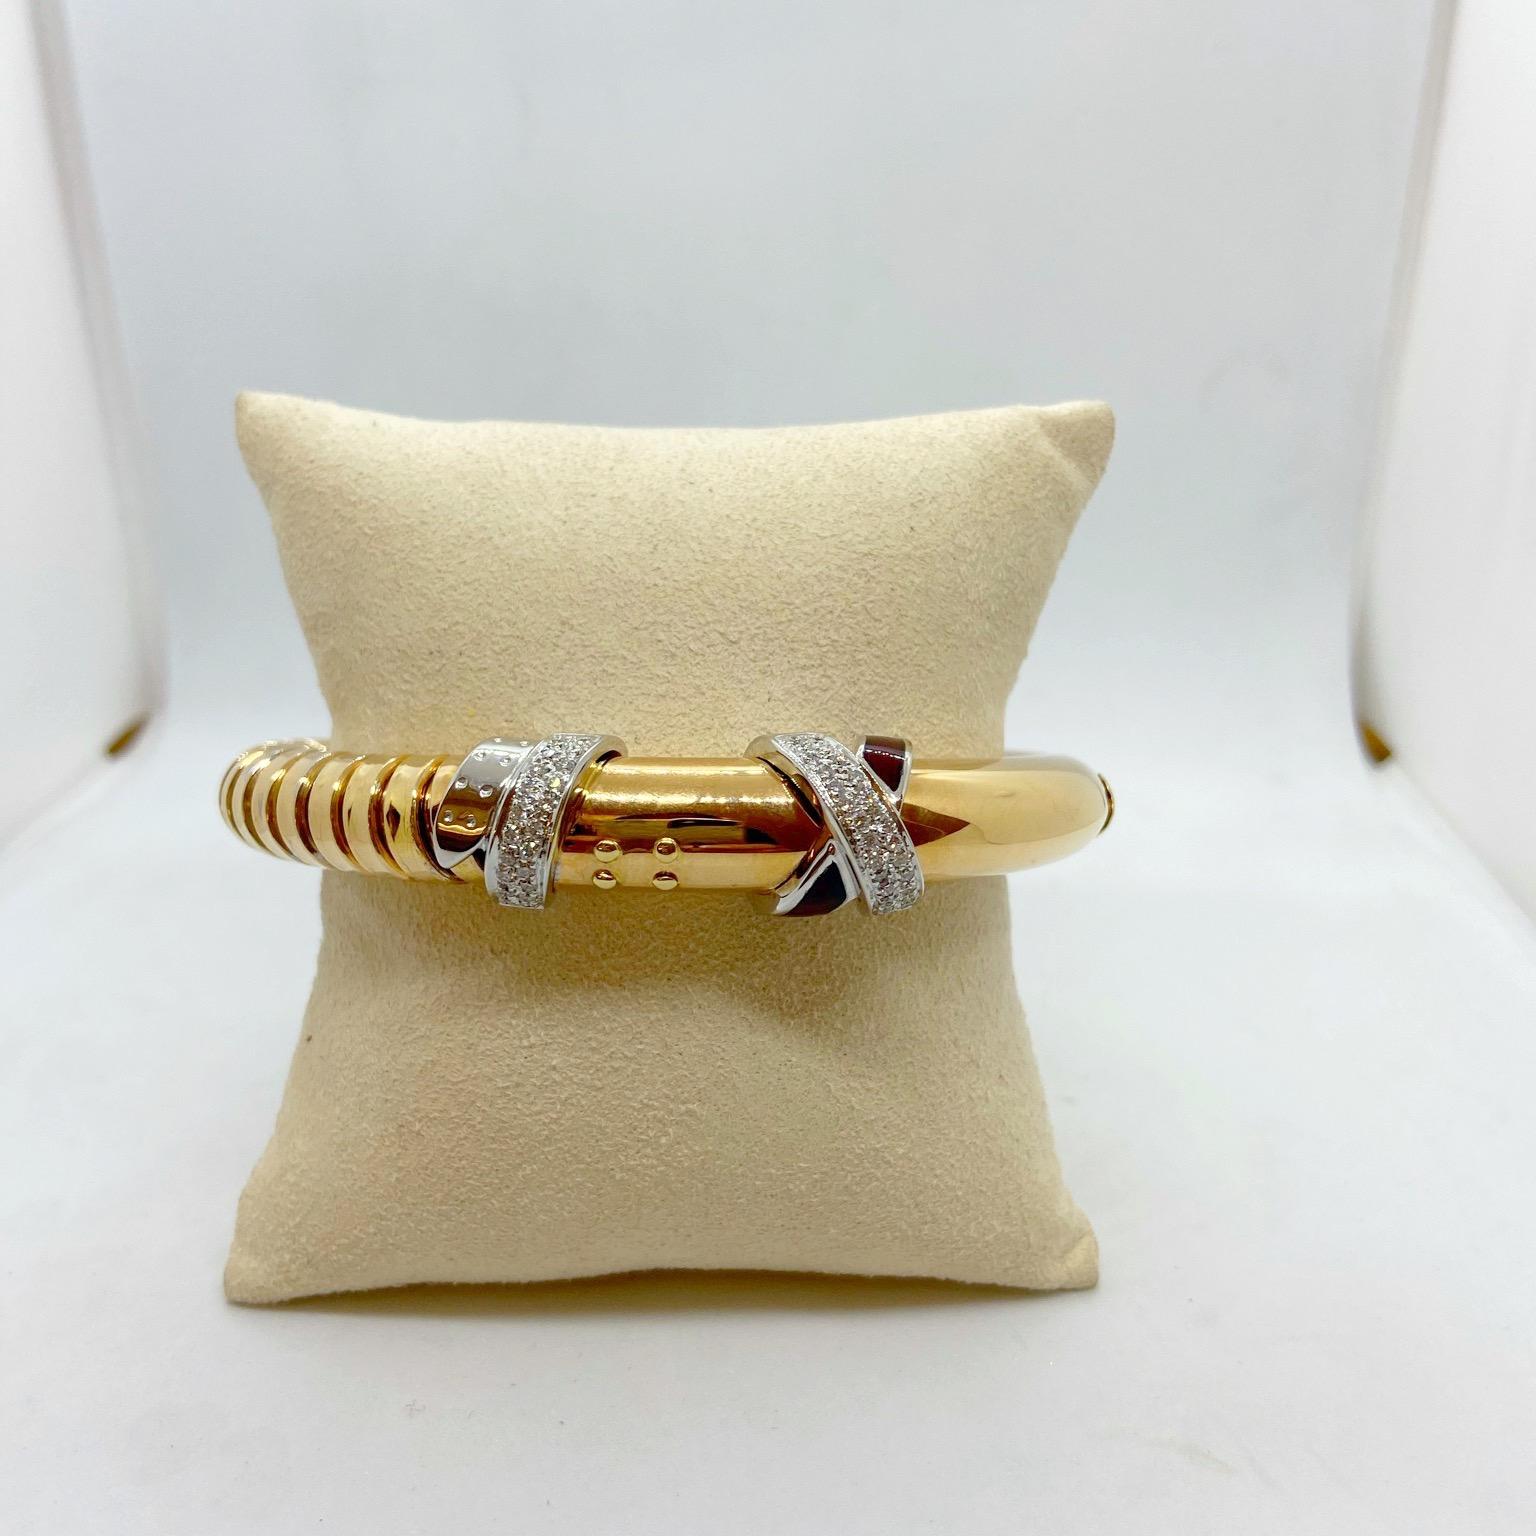 La Nouvelle 18 Karat Gold Bracelet with .59 Carat Diamonds and Burgundy Enamel In New Condition For Sale In New York, NY